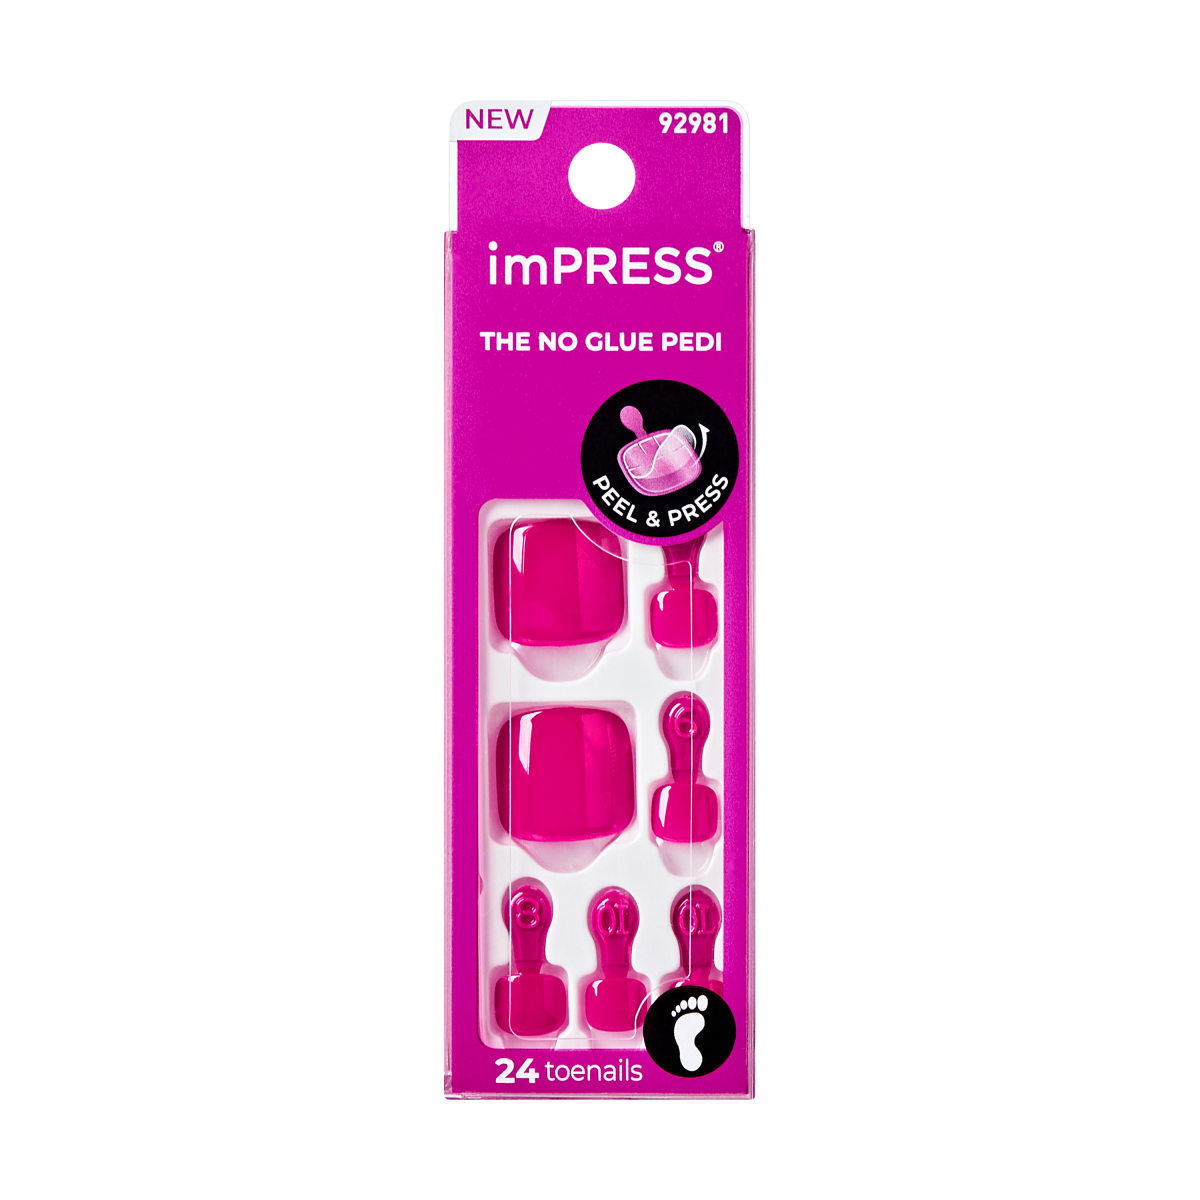 imPRESS Press-on-Pedicure- Almost There